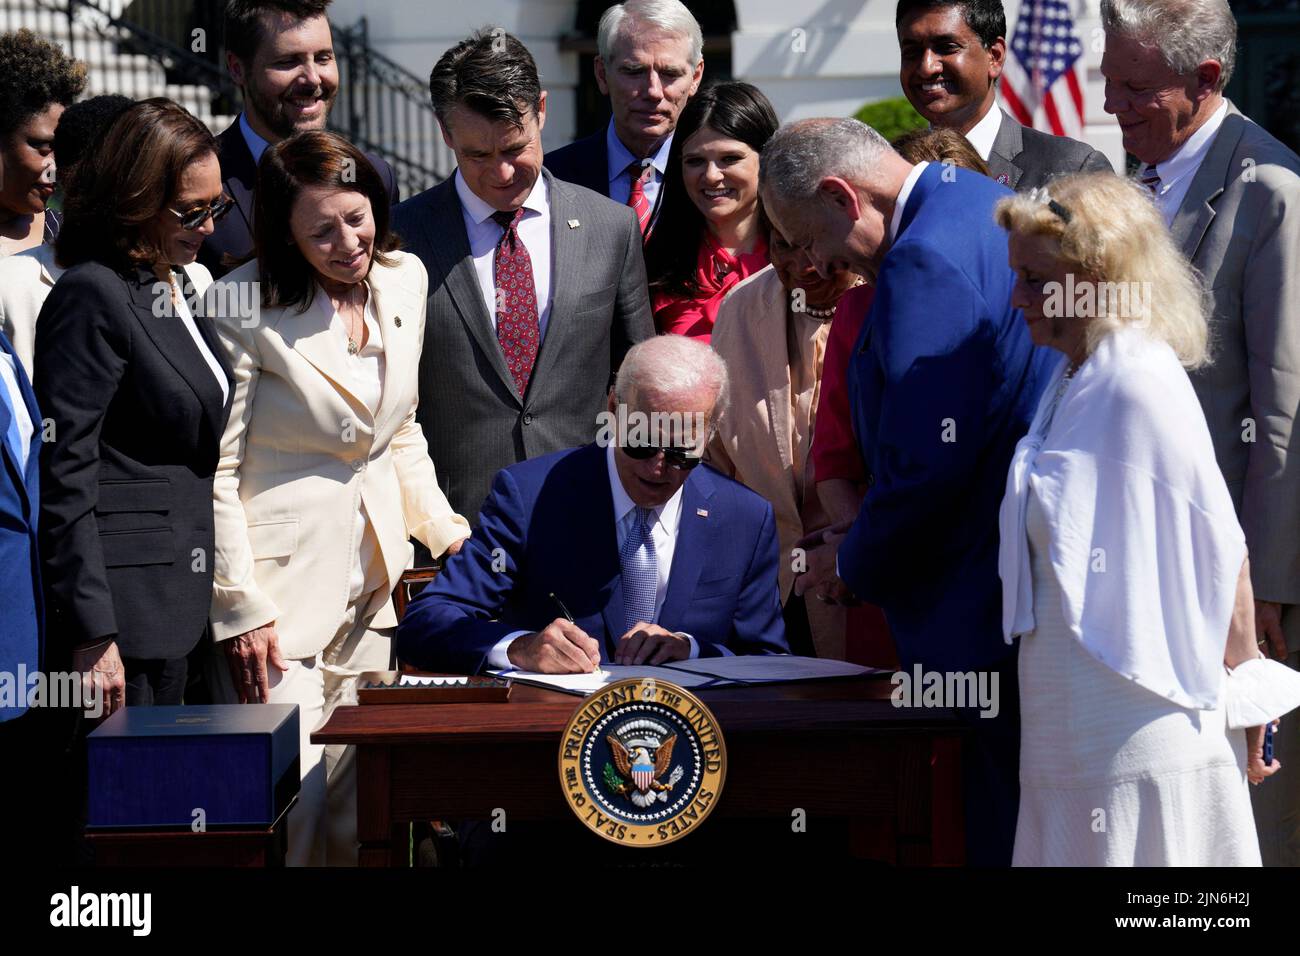 U.S. President Joe Biden signs into law the CHIPS and Science Act during a ceremony on the South Lawn of the White House in Washington on August 9, 2022. Photo by Yuri Gripas/ABACAPRESS.COM Stock Photo